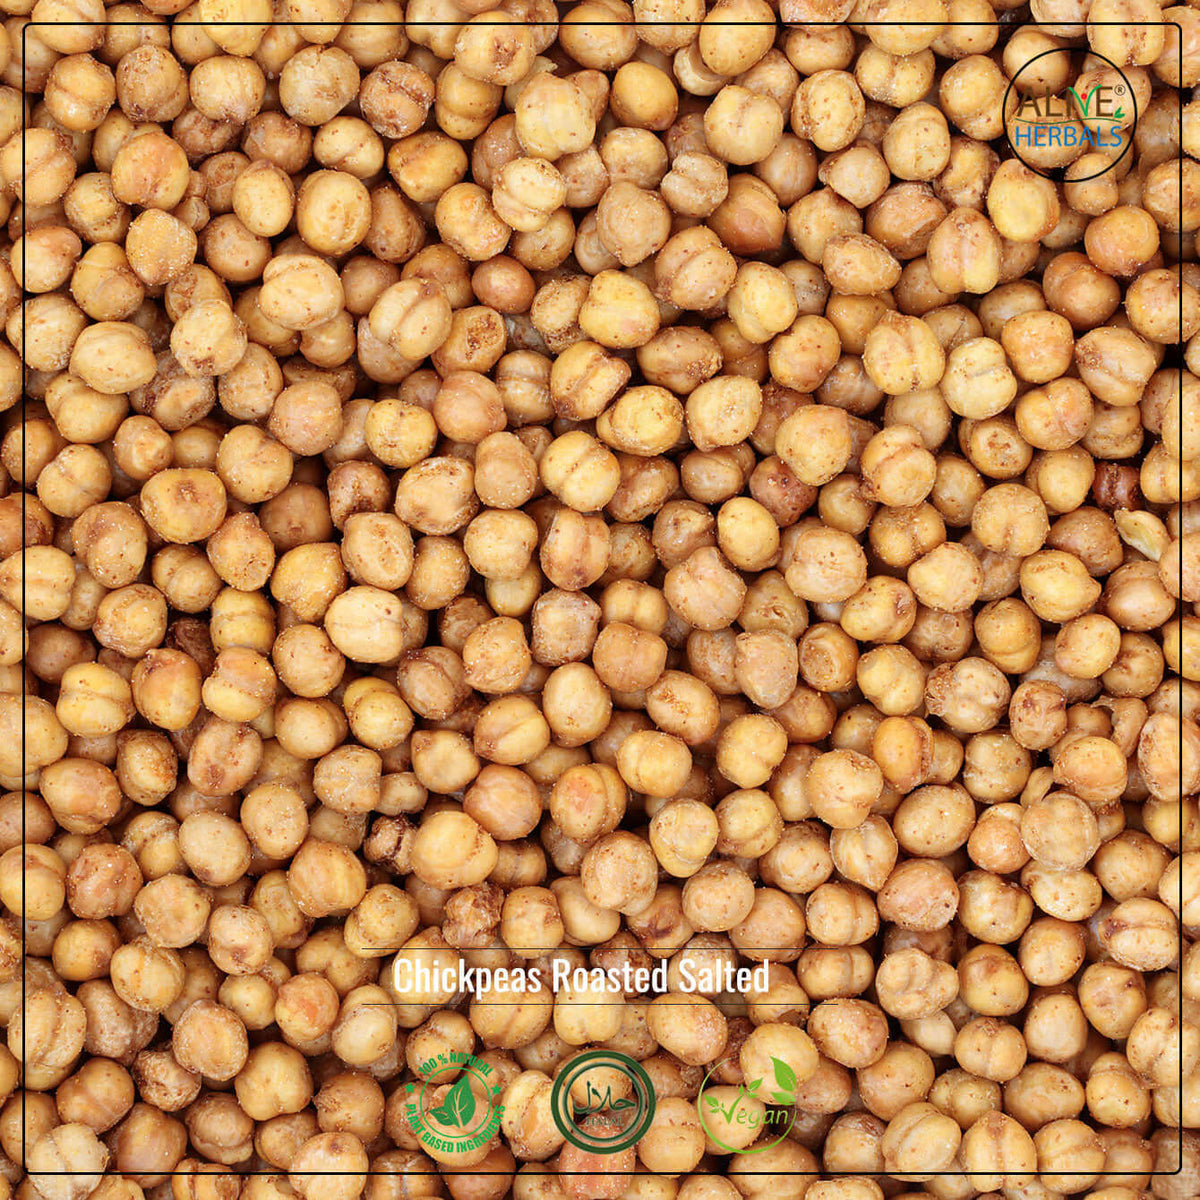 Roasted Salted Chickpeas - Buy at Natural Food Store | Alive Herbals.